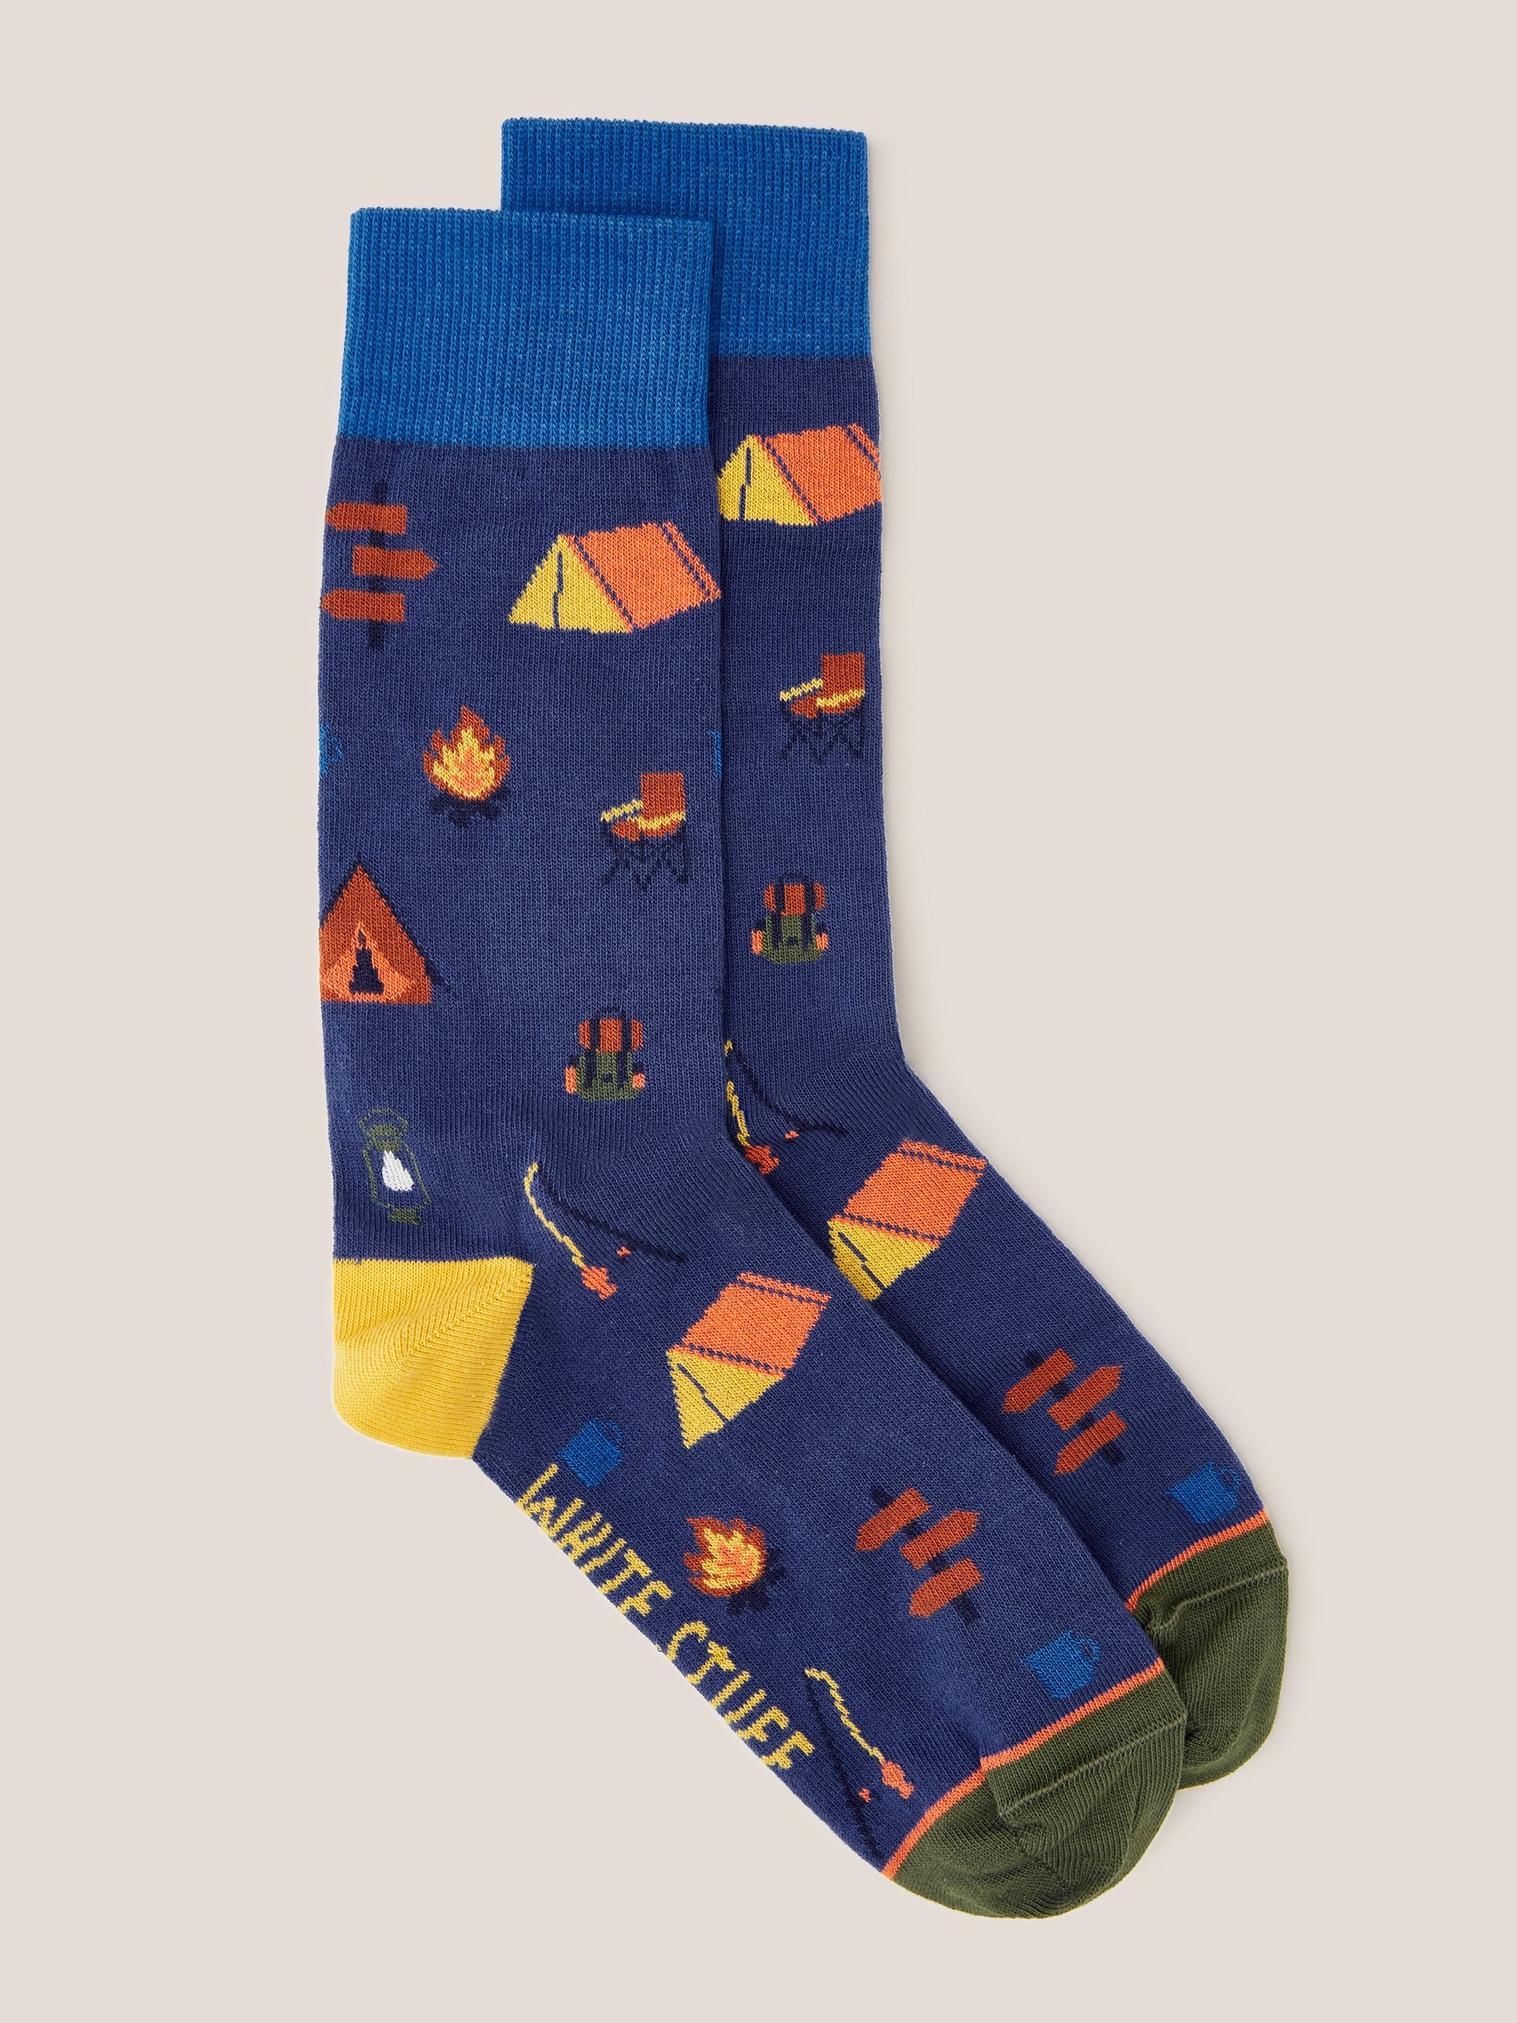 Campsite Ankle Sock in NAVY MULTI - FLAT FRONT